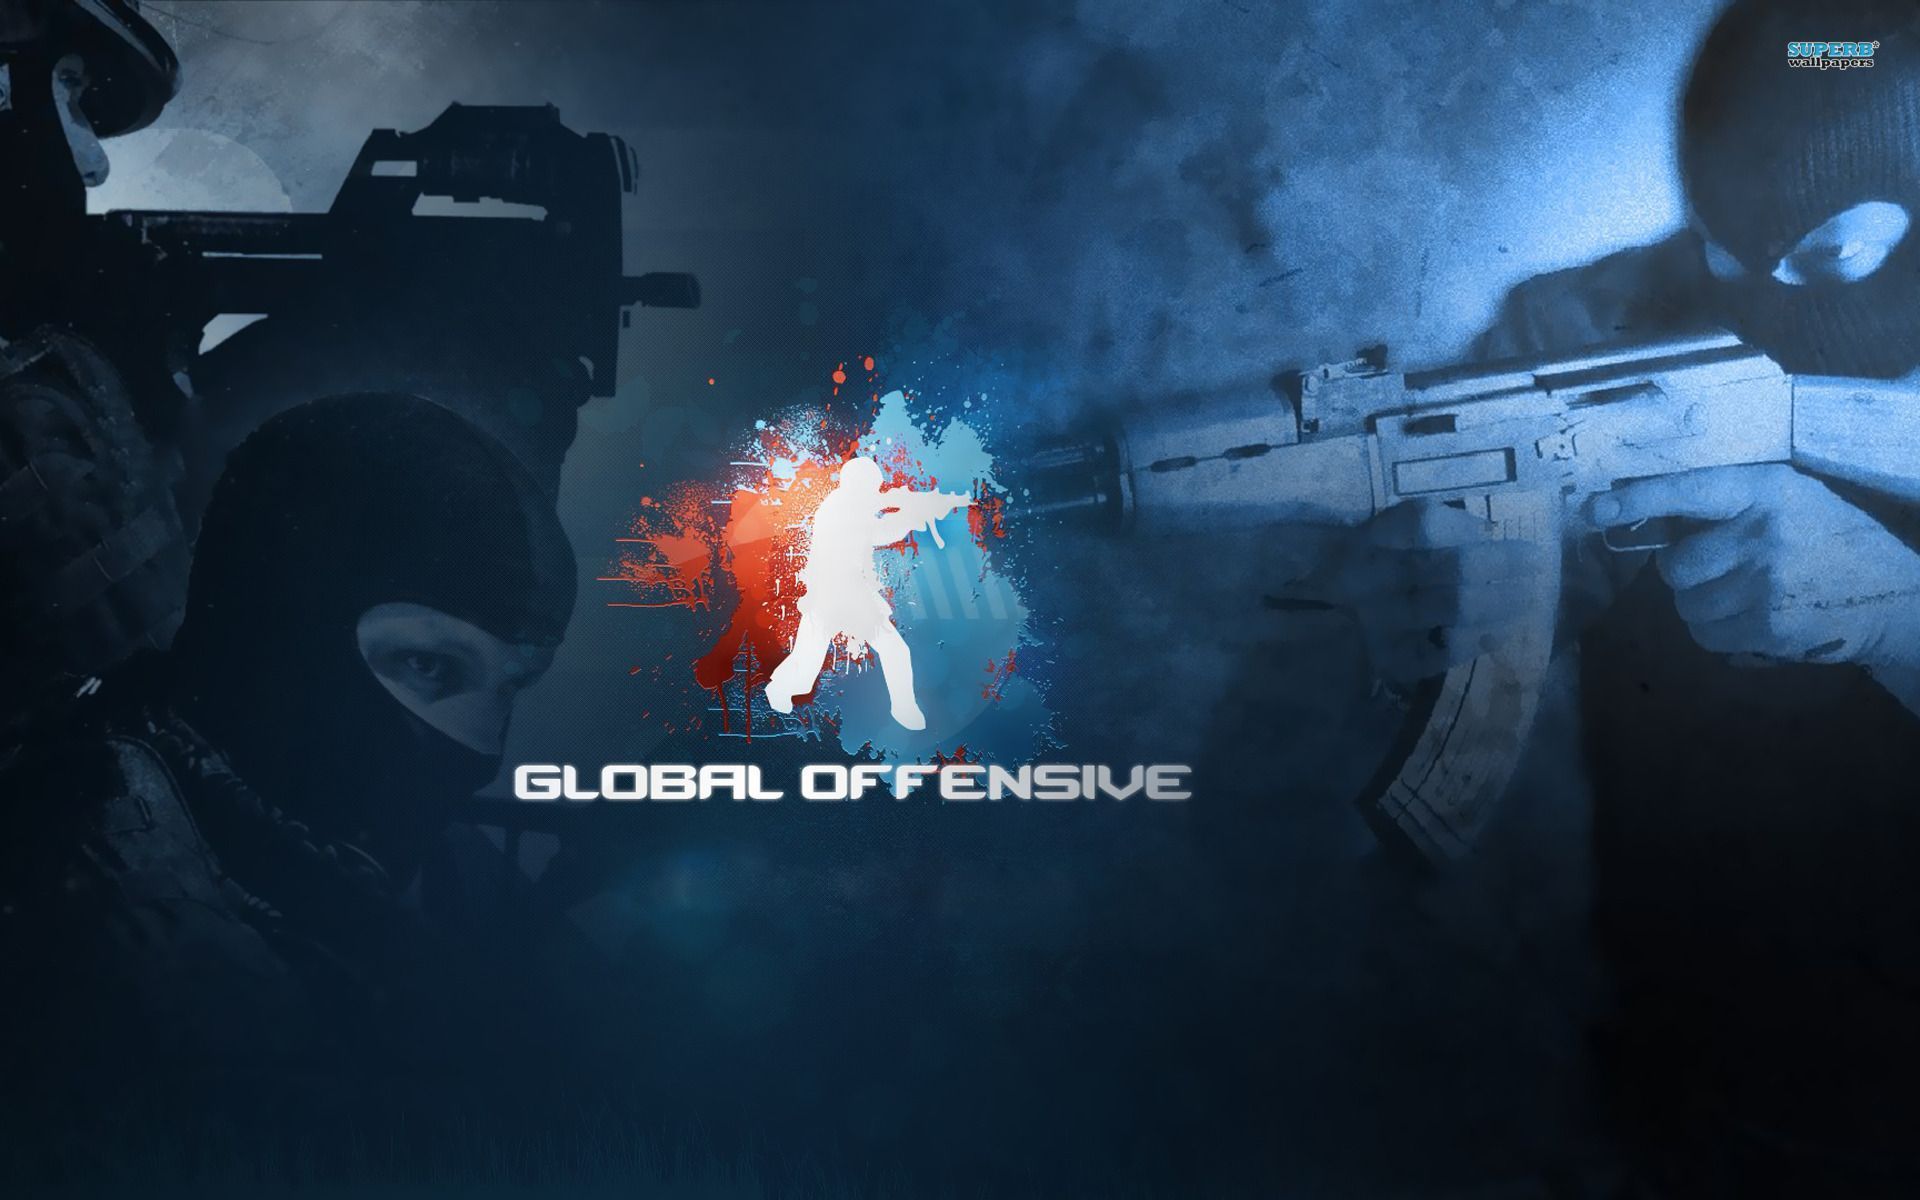 Counter-Strike: Global Offensive wallpaper - Game wallpapers - #14816